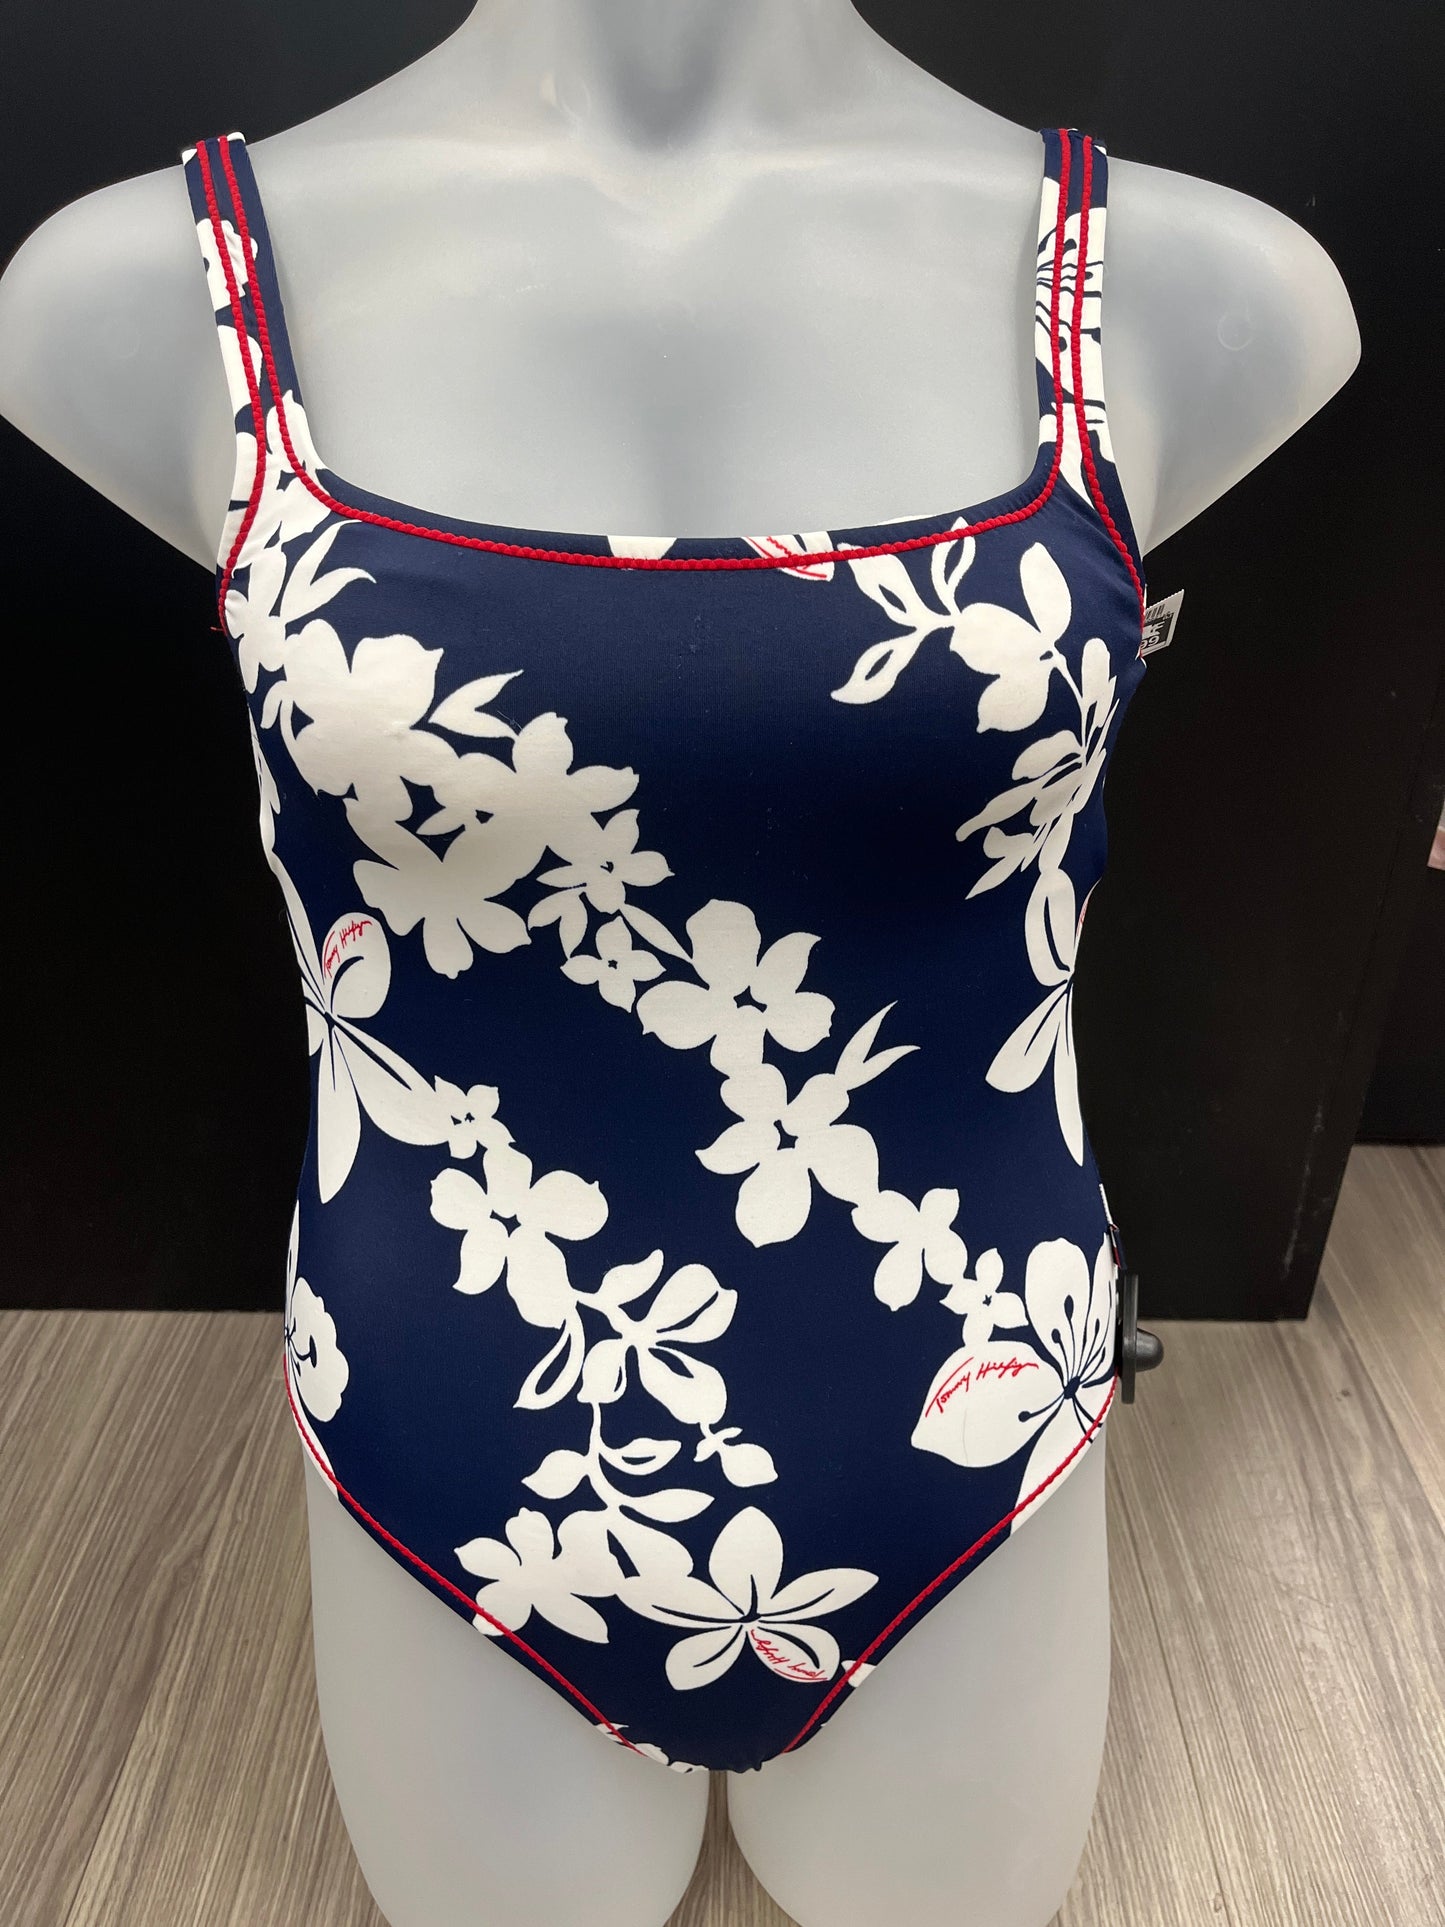 Red White Blue Swimsuit Tommy Hilfiger, Size 10